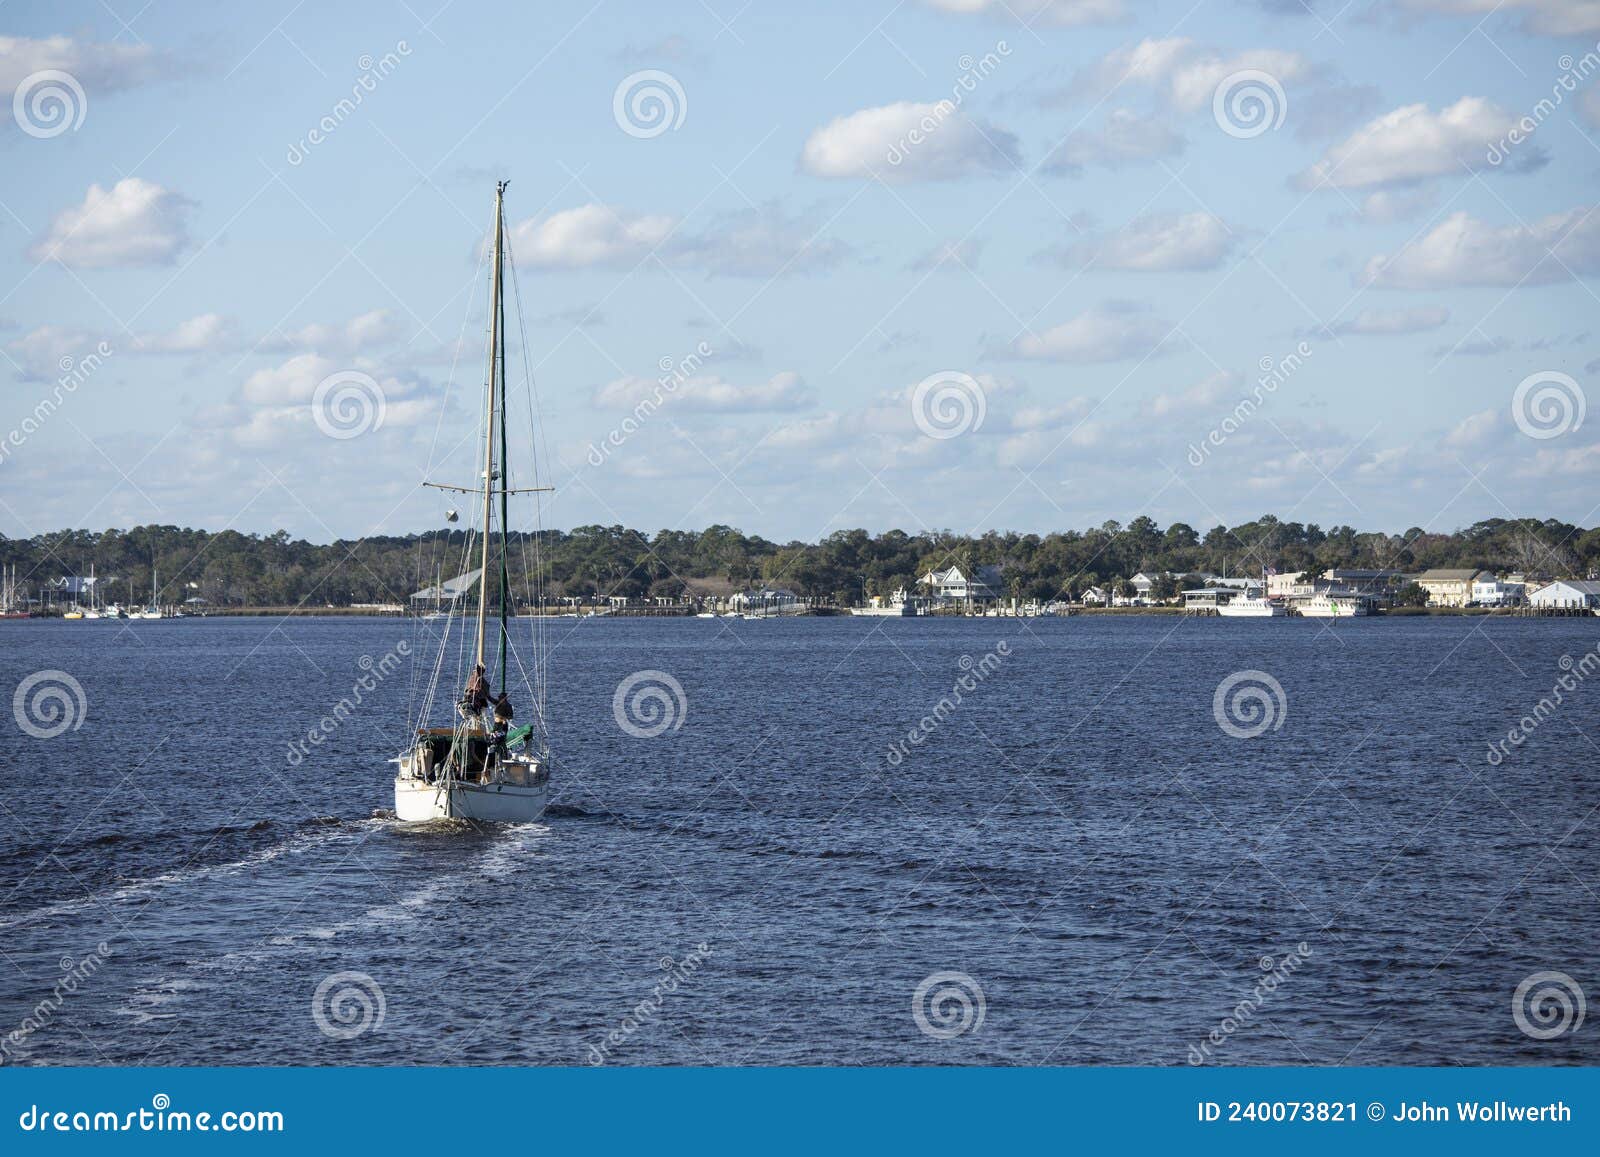 a sailboat moves across the water toward st marys, georgia in this view from the water